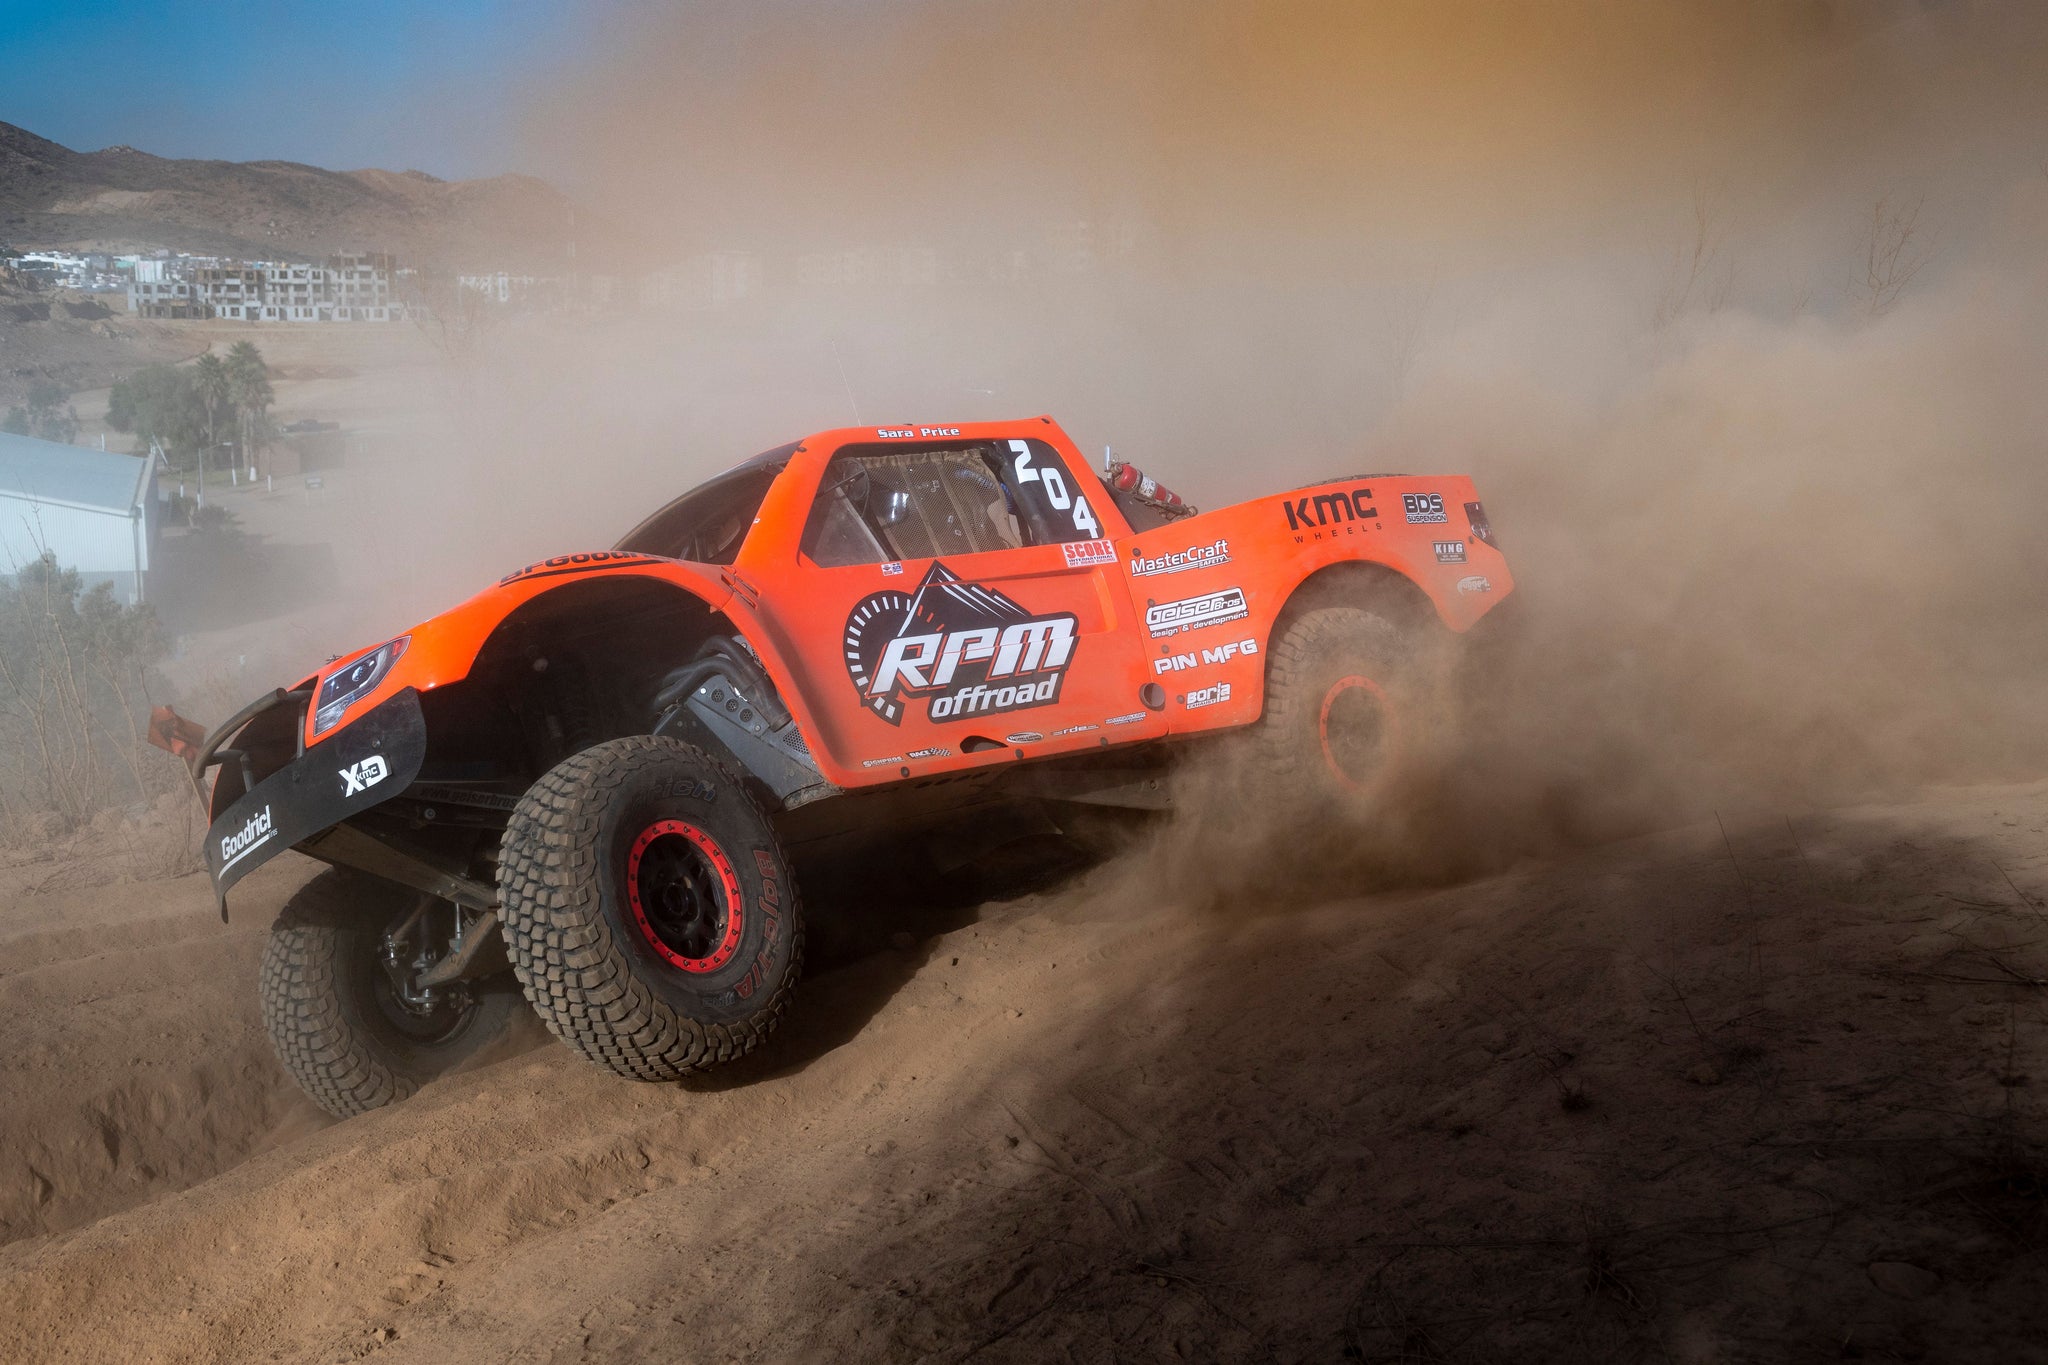 Sara Price will be competing at her first-ever SCORE Baja 1000